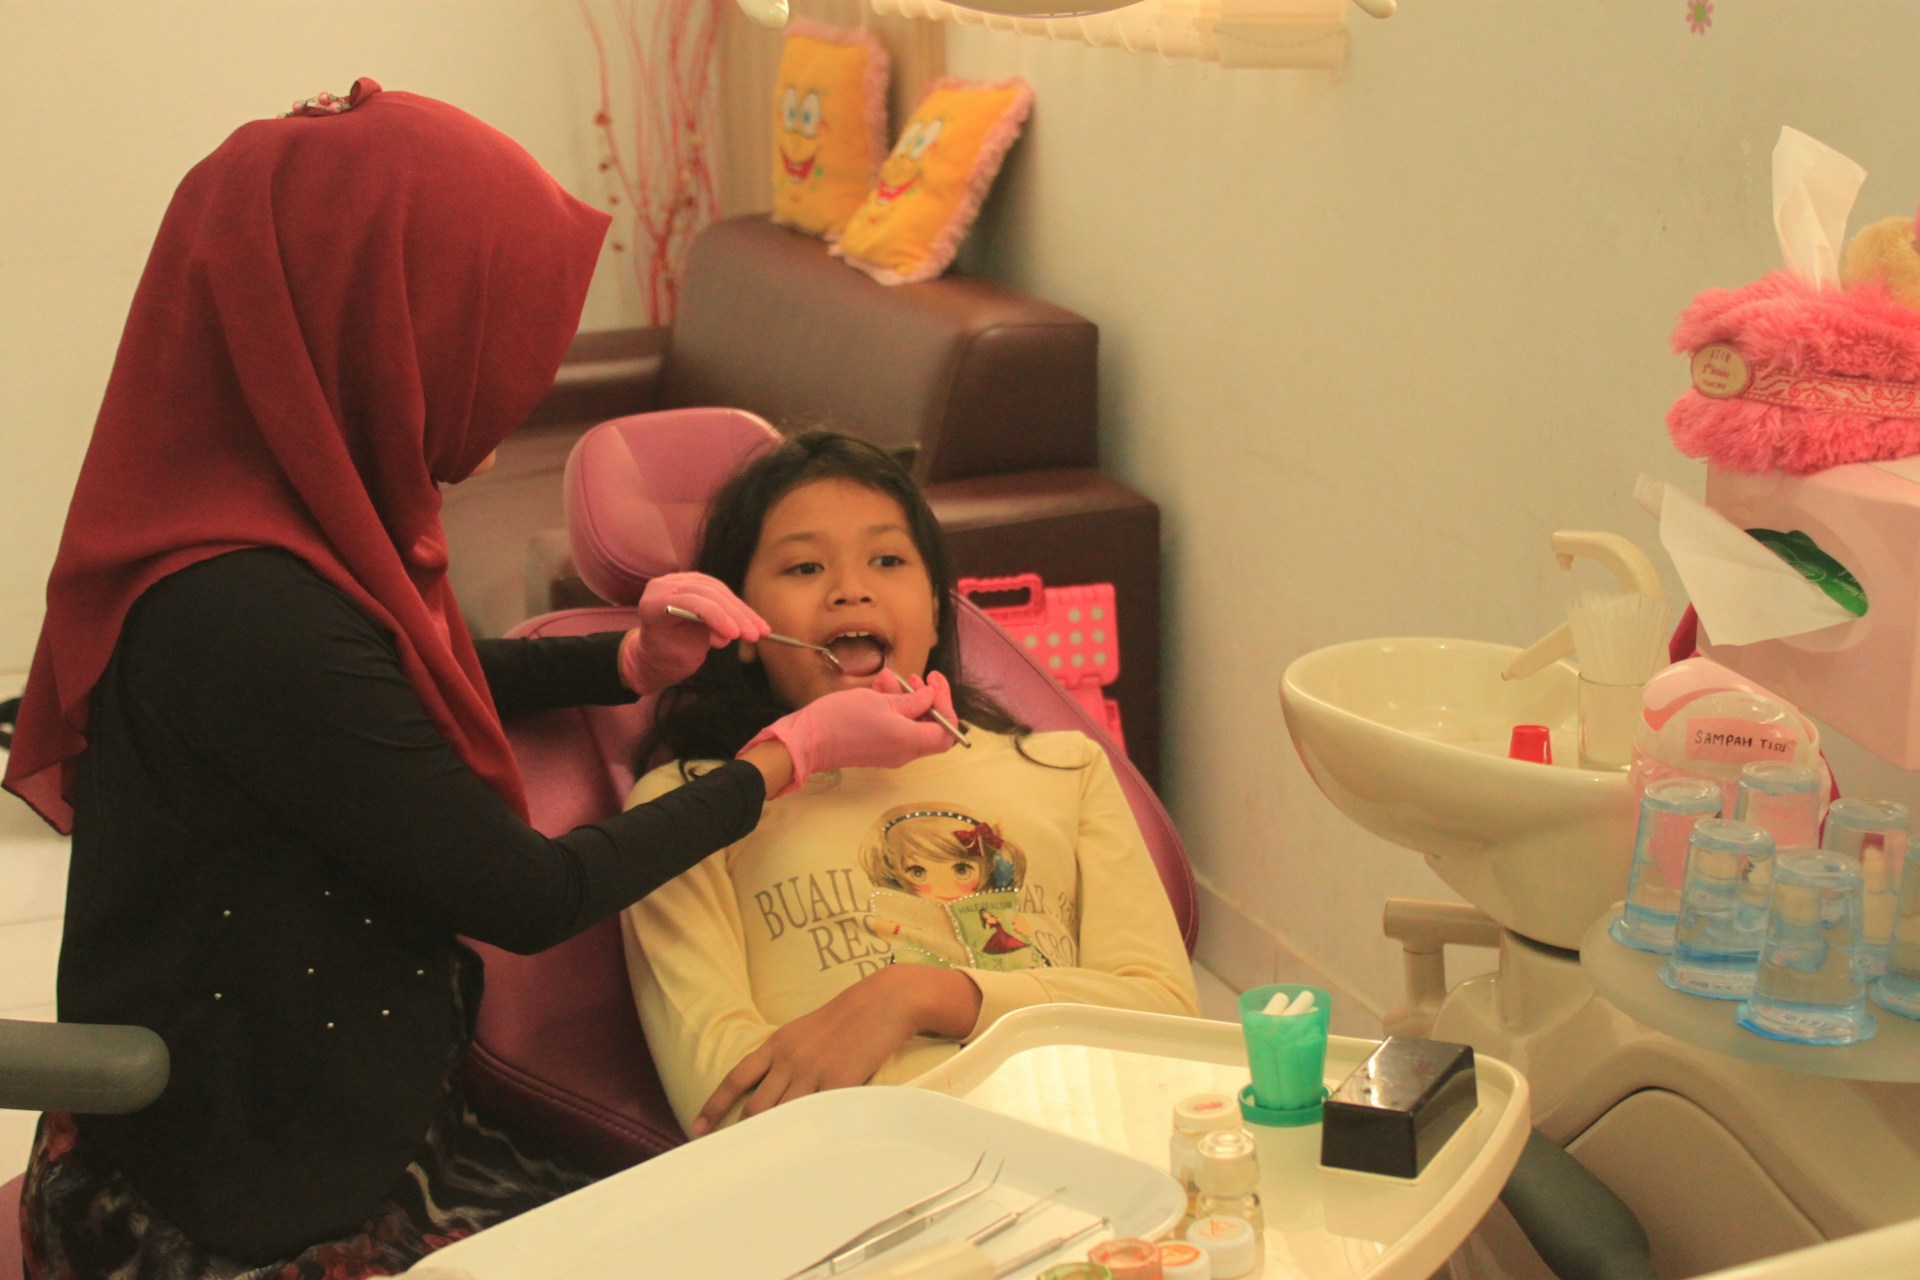 Paediatric Dentistry 101: How to Keep Your Child’s Smile Bright